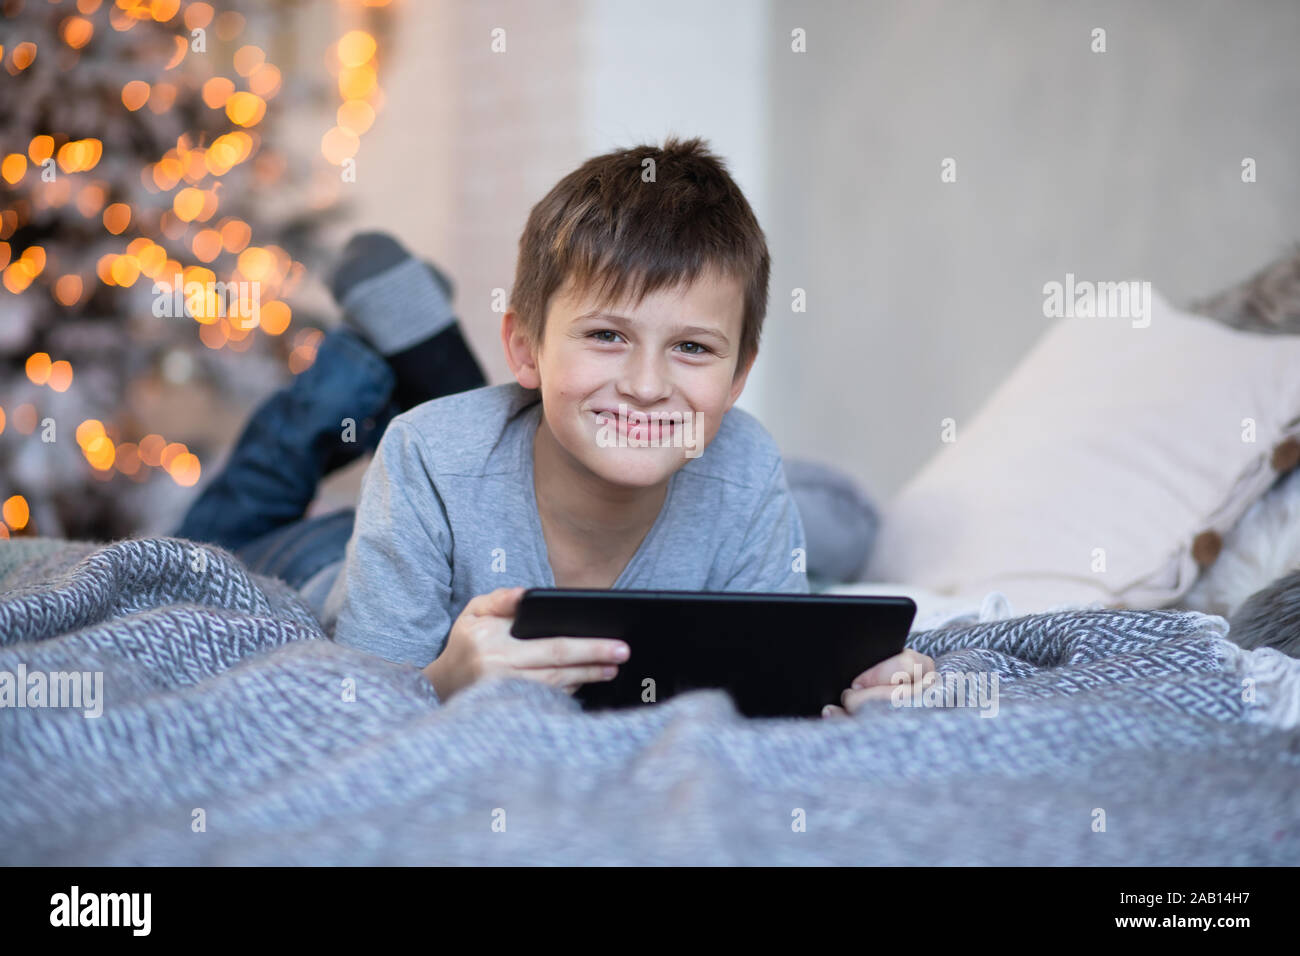 Happy handsome boy with a tablet in hands. child plays computer games on tablet. boy lies on bed opposite Christmas tree before Christmas. Black Frida Stock Photo